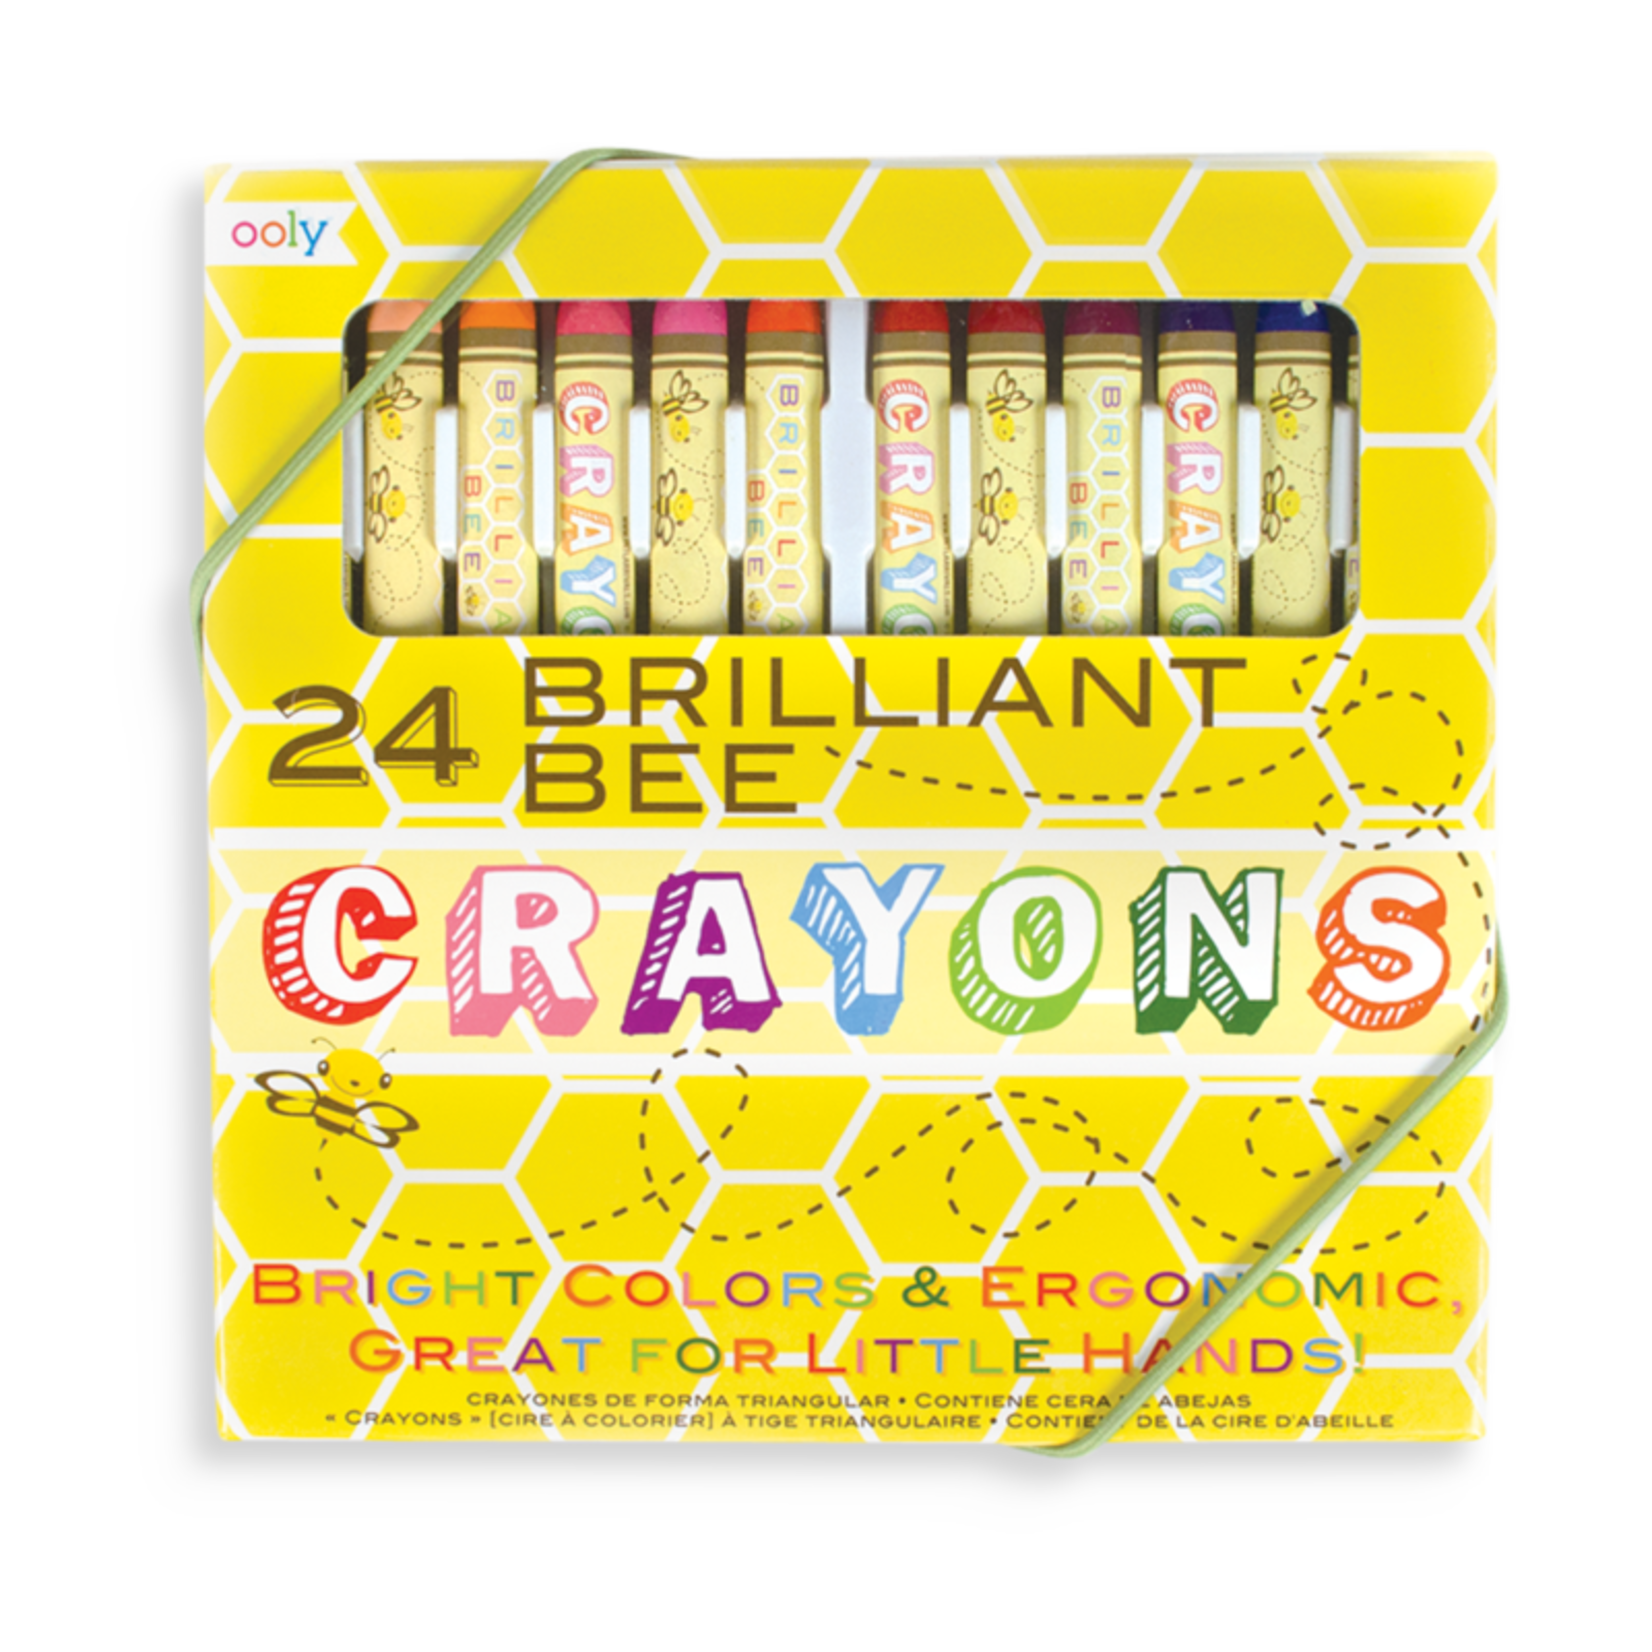 Ooly Brilliant Bee Crayons, 24 Pk